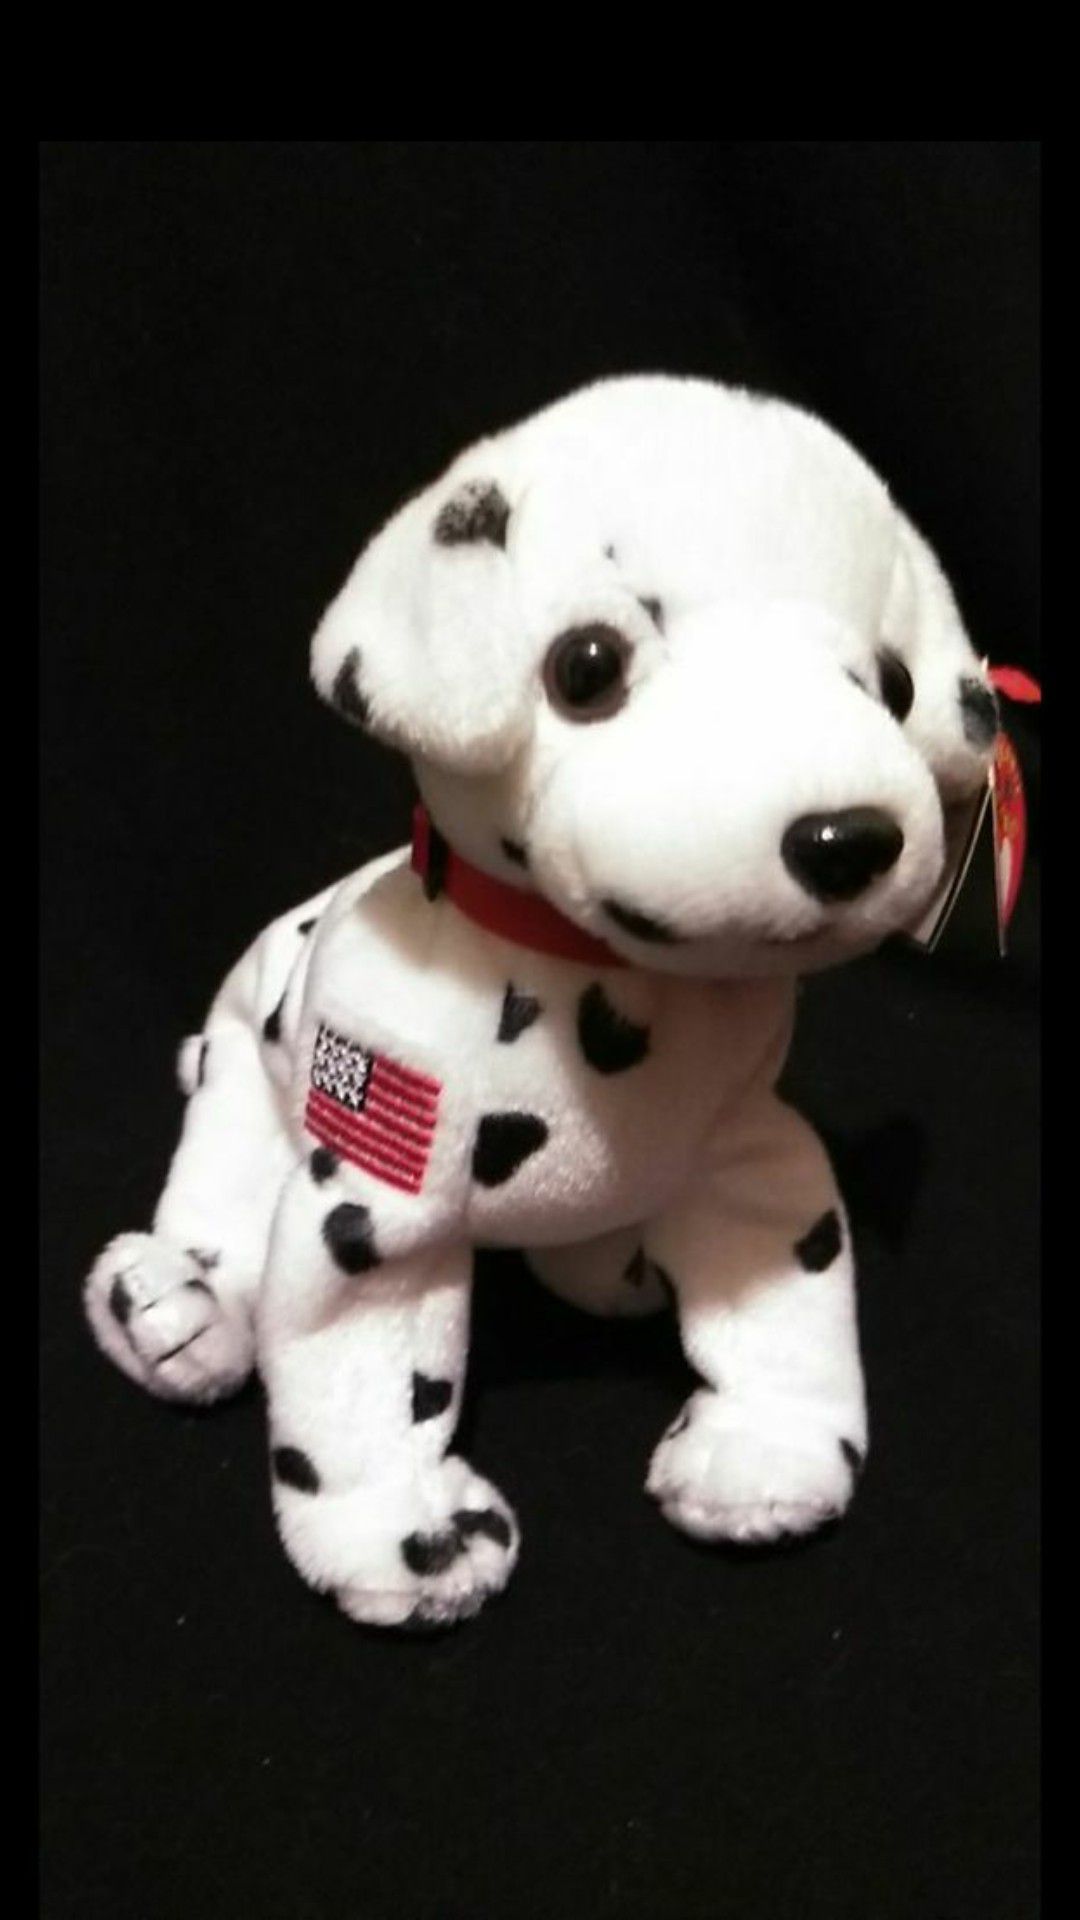 Mint Condition Retired 2001 Ty Beanie Babies Rescue FDNY The Dalmatian September 11th Commemorative With Swing Tags